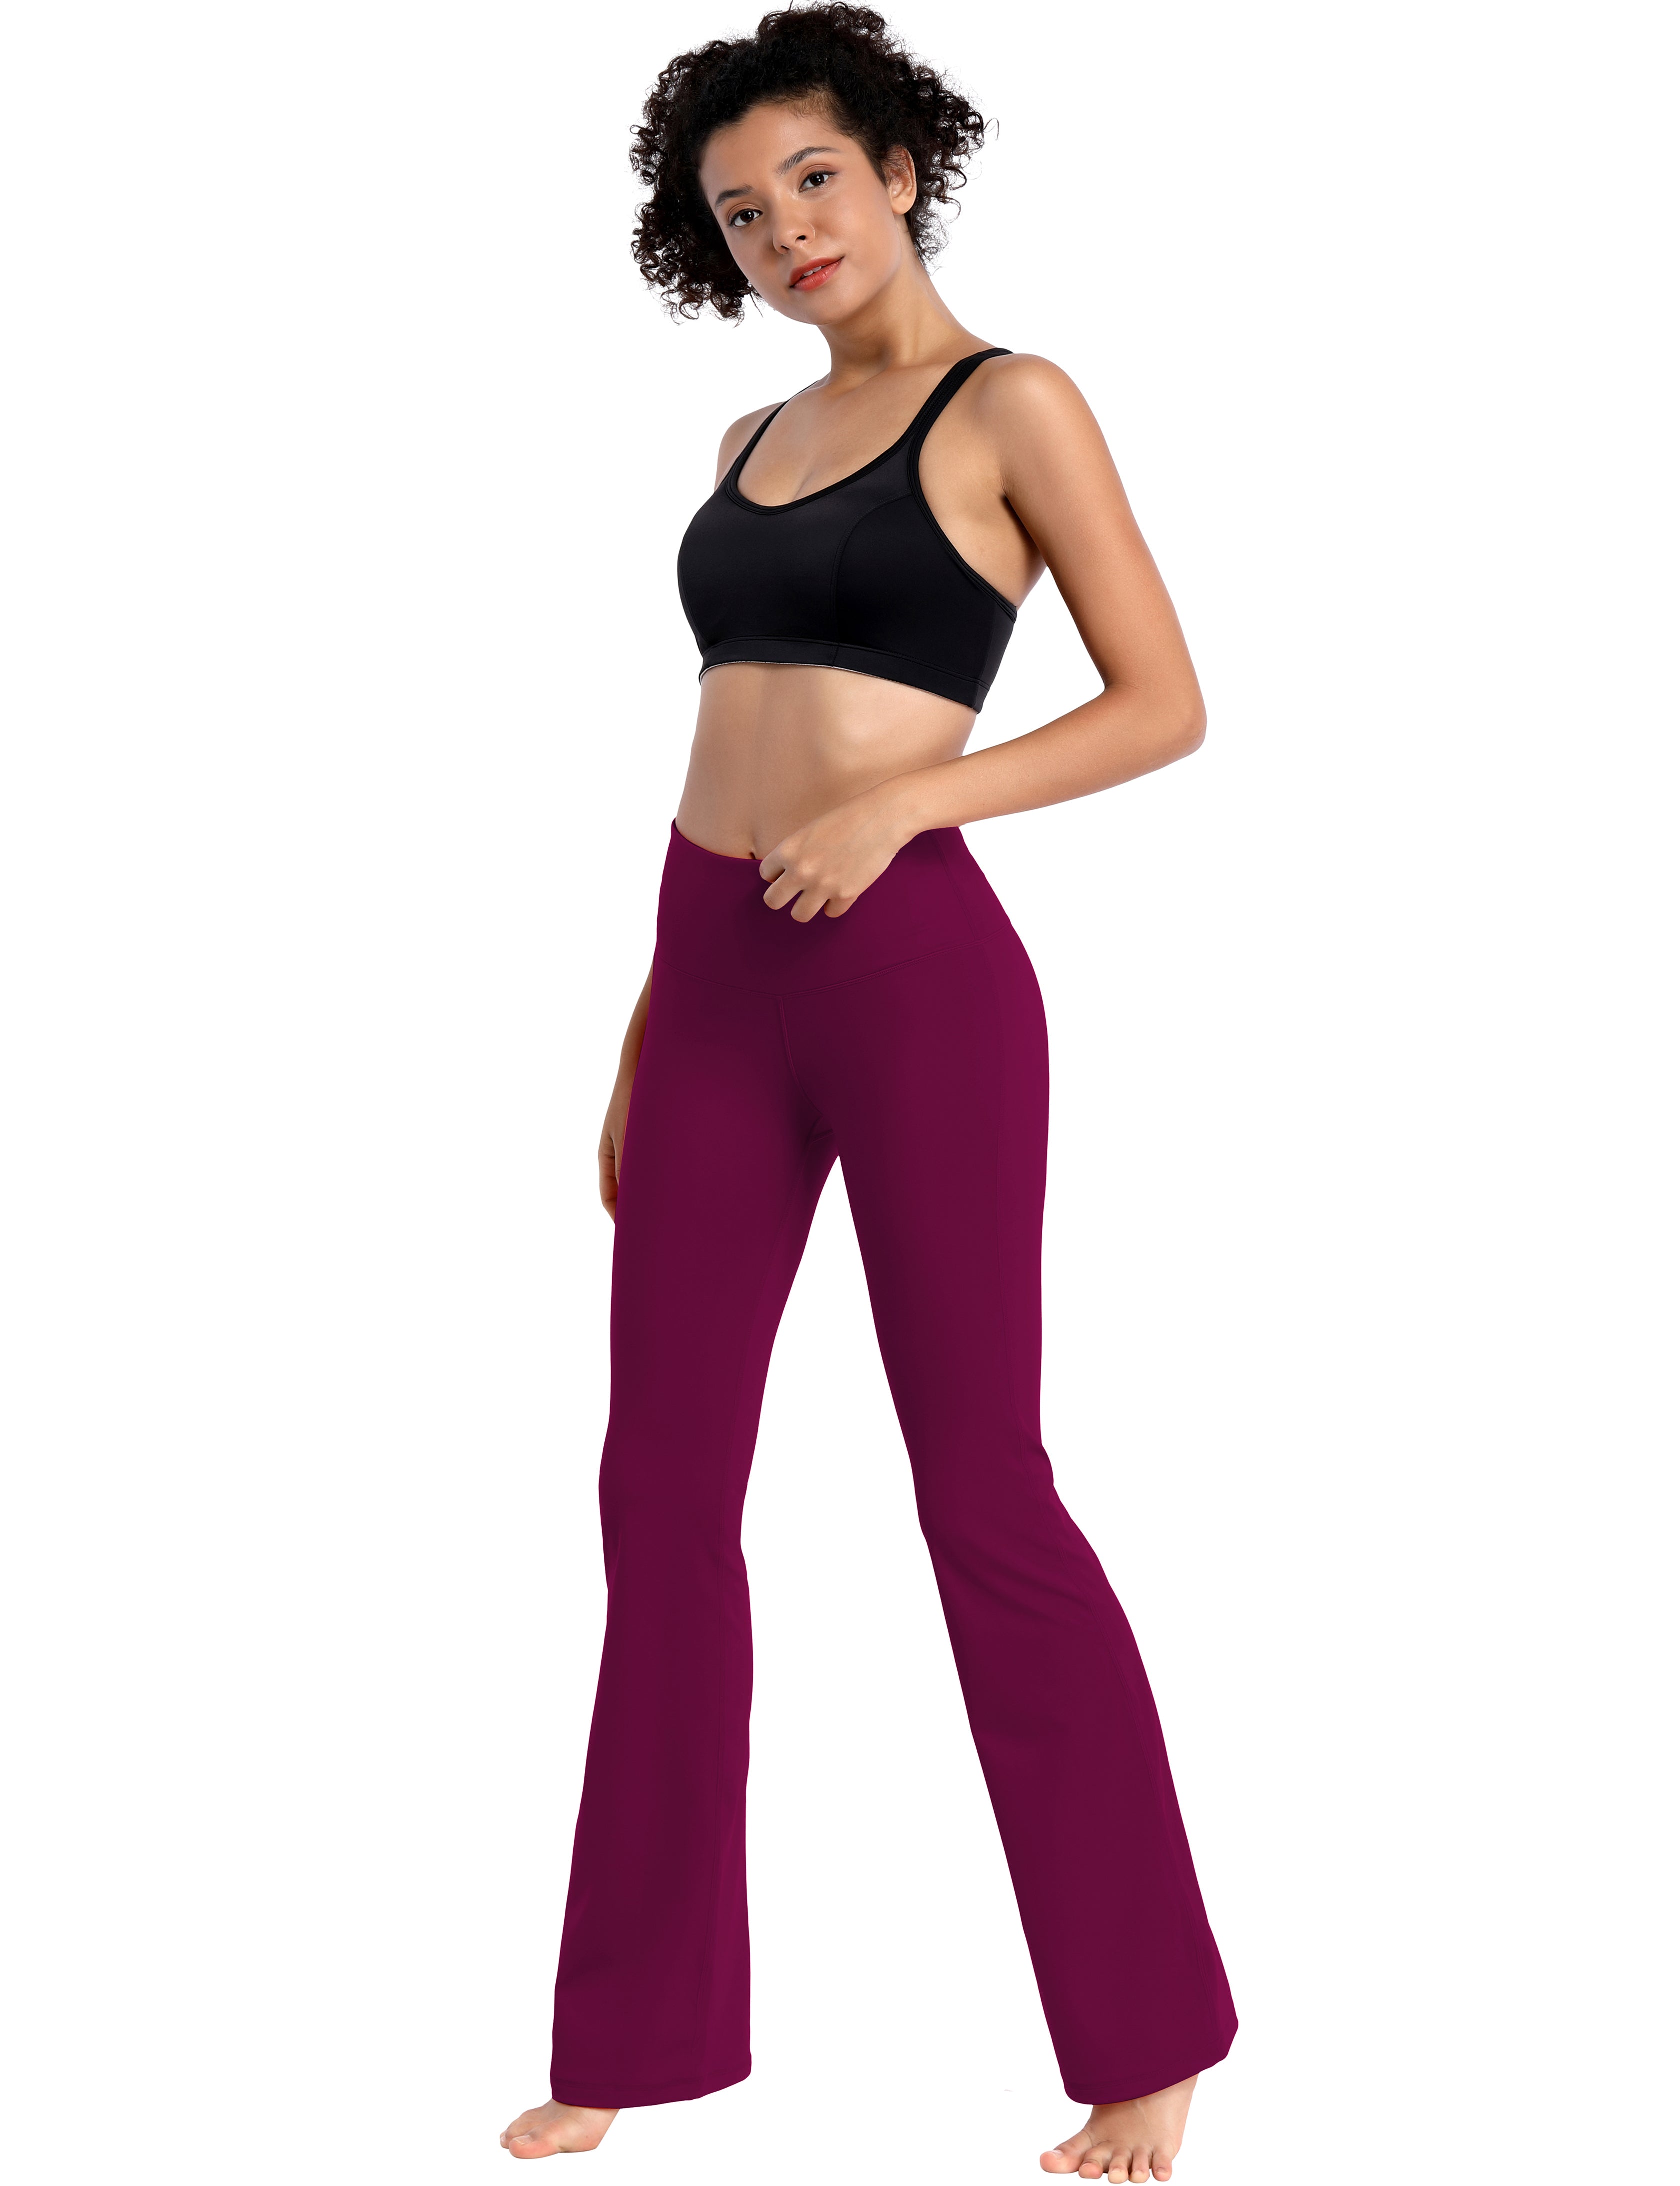 High Waist Bootcut Leggings Grapevine 75%Nylon/25%Spandex Fabric doesn't attract lint easily 4-way stretch No see-through Moisture-wicking Tummy control Inner pocket Five lengths